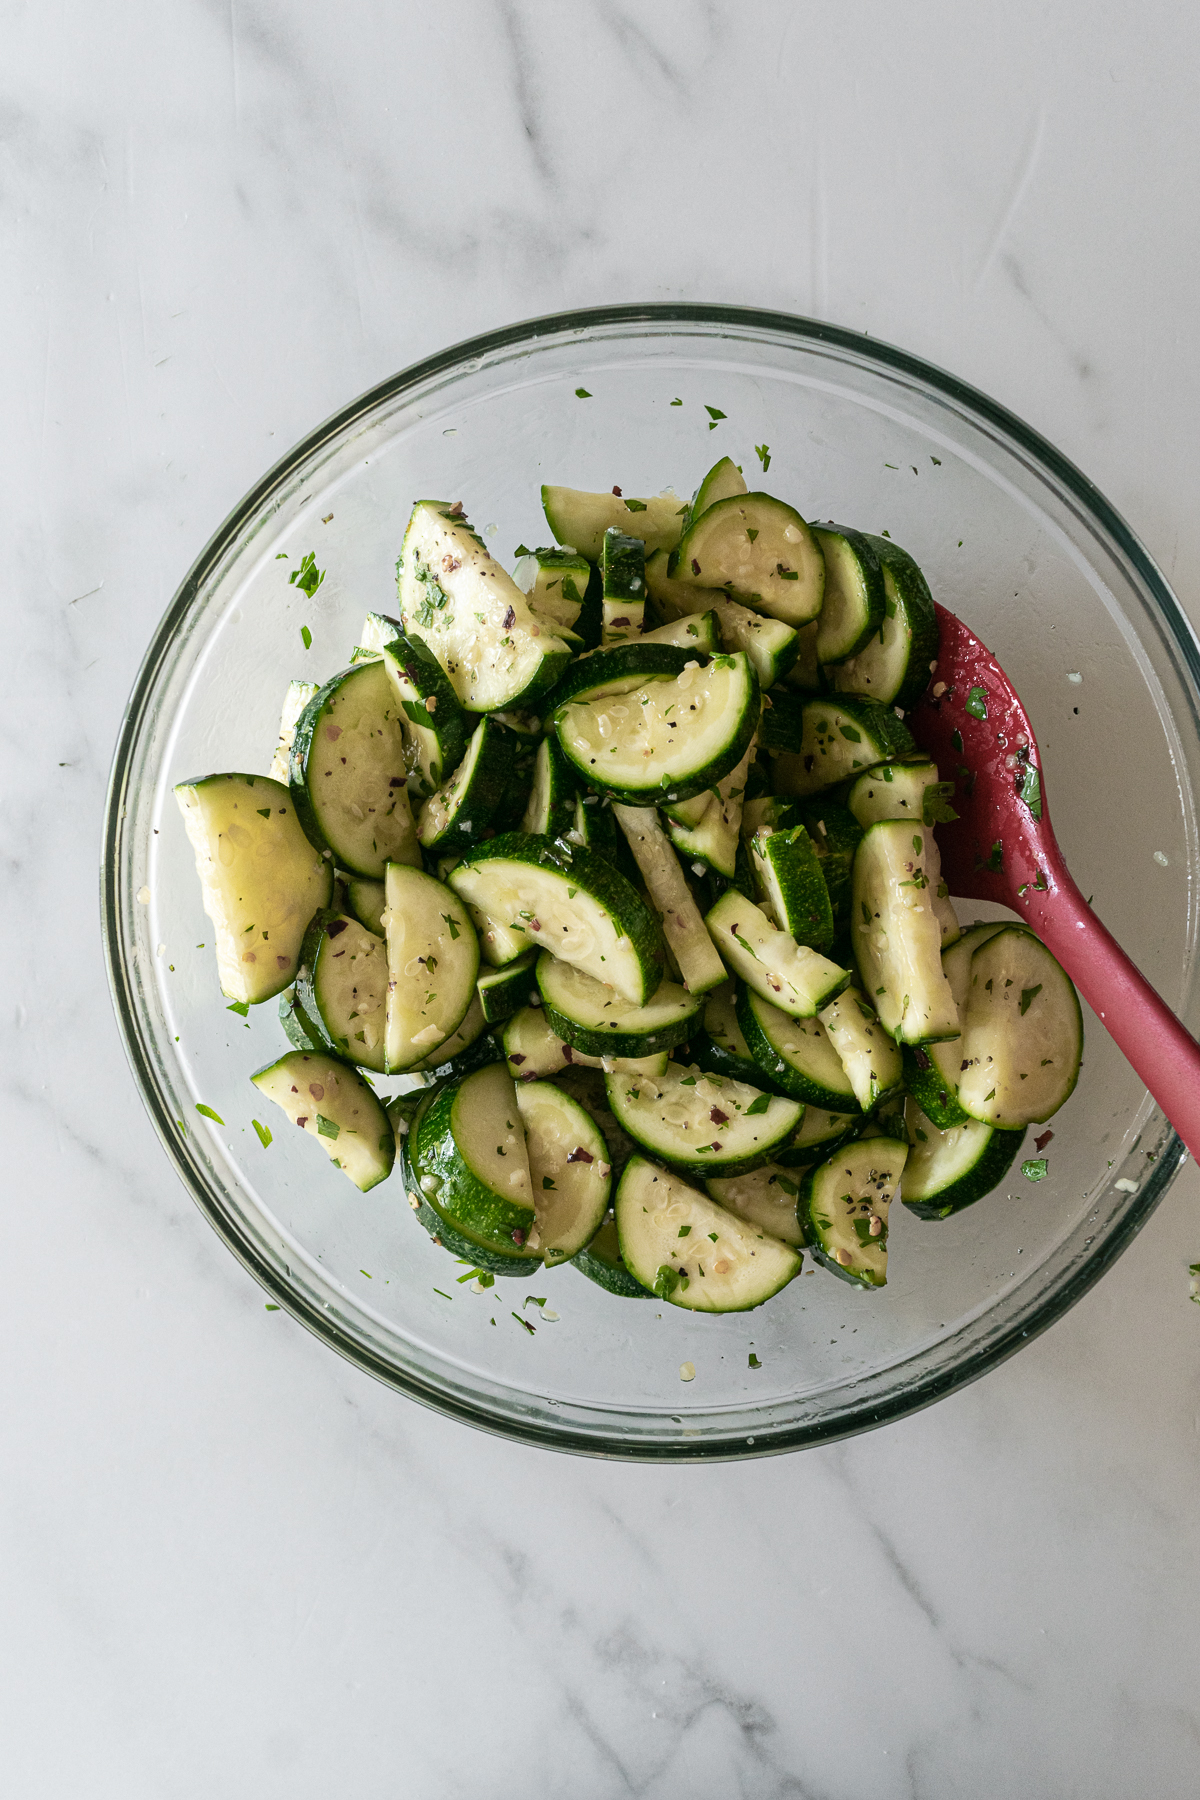 zucchini slices with seasonings in a bowl on a white table.